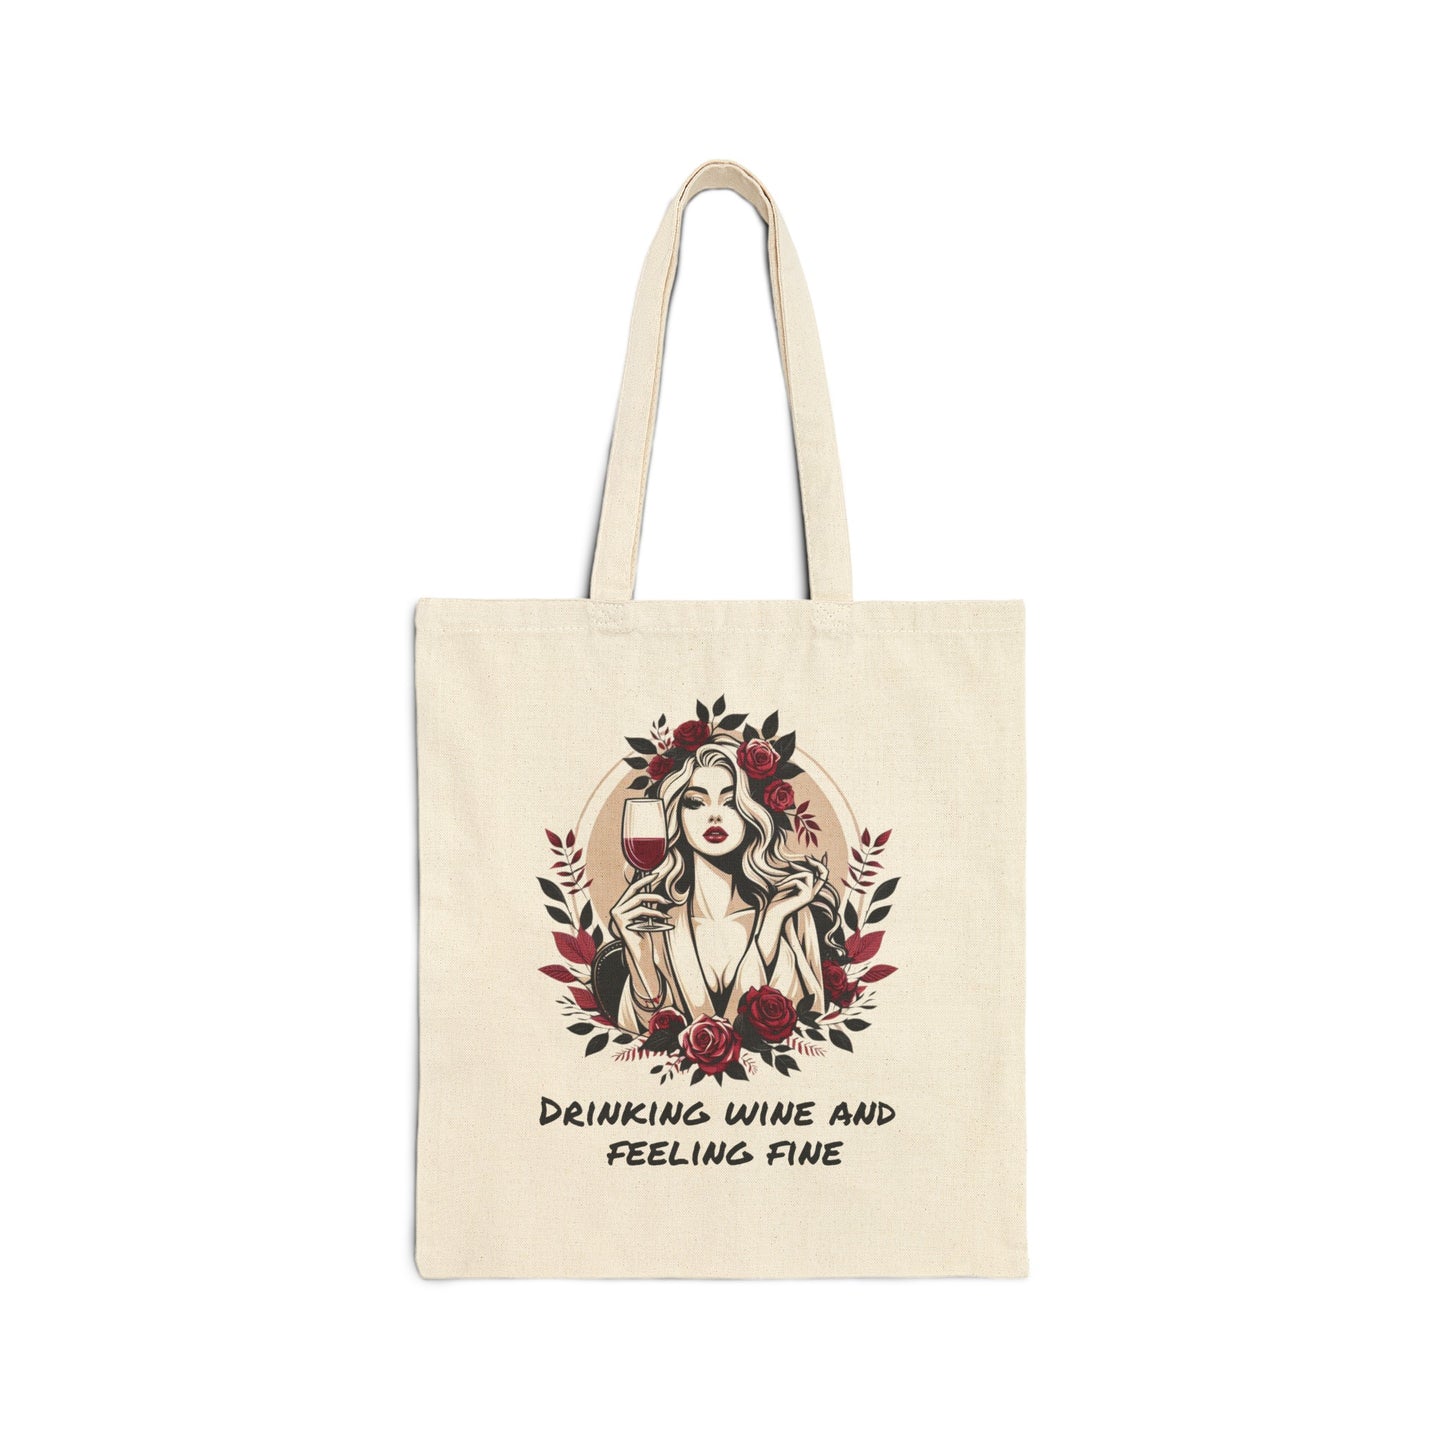 Drink wine and feeling fine tote bag